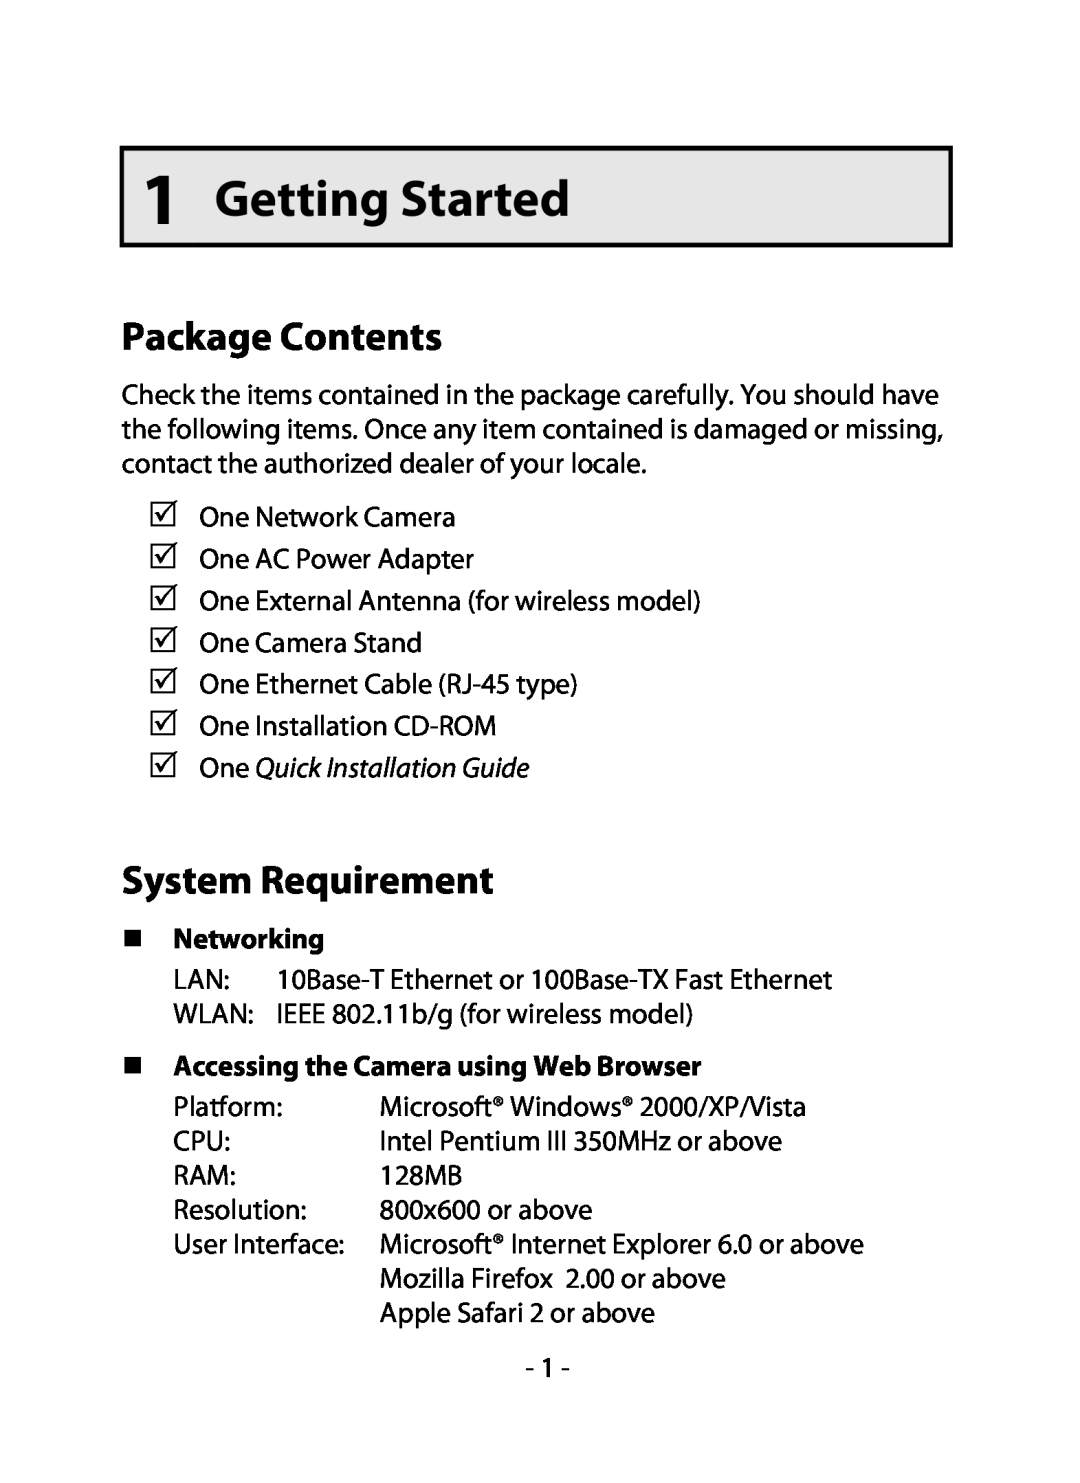 Swann 500 Getting Started, Package Contents, System Requirement, „Networking, „Accessing the Camera using Web Browser 